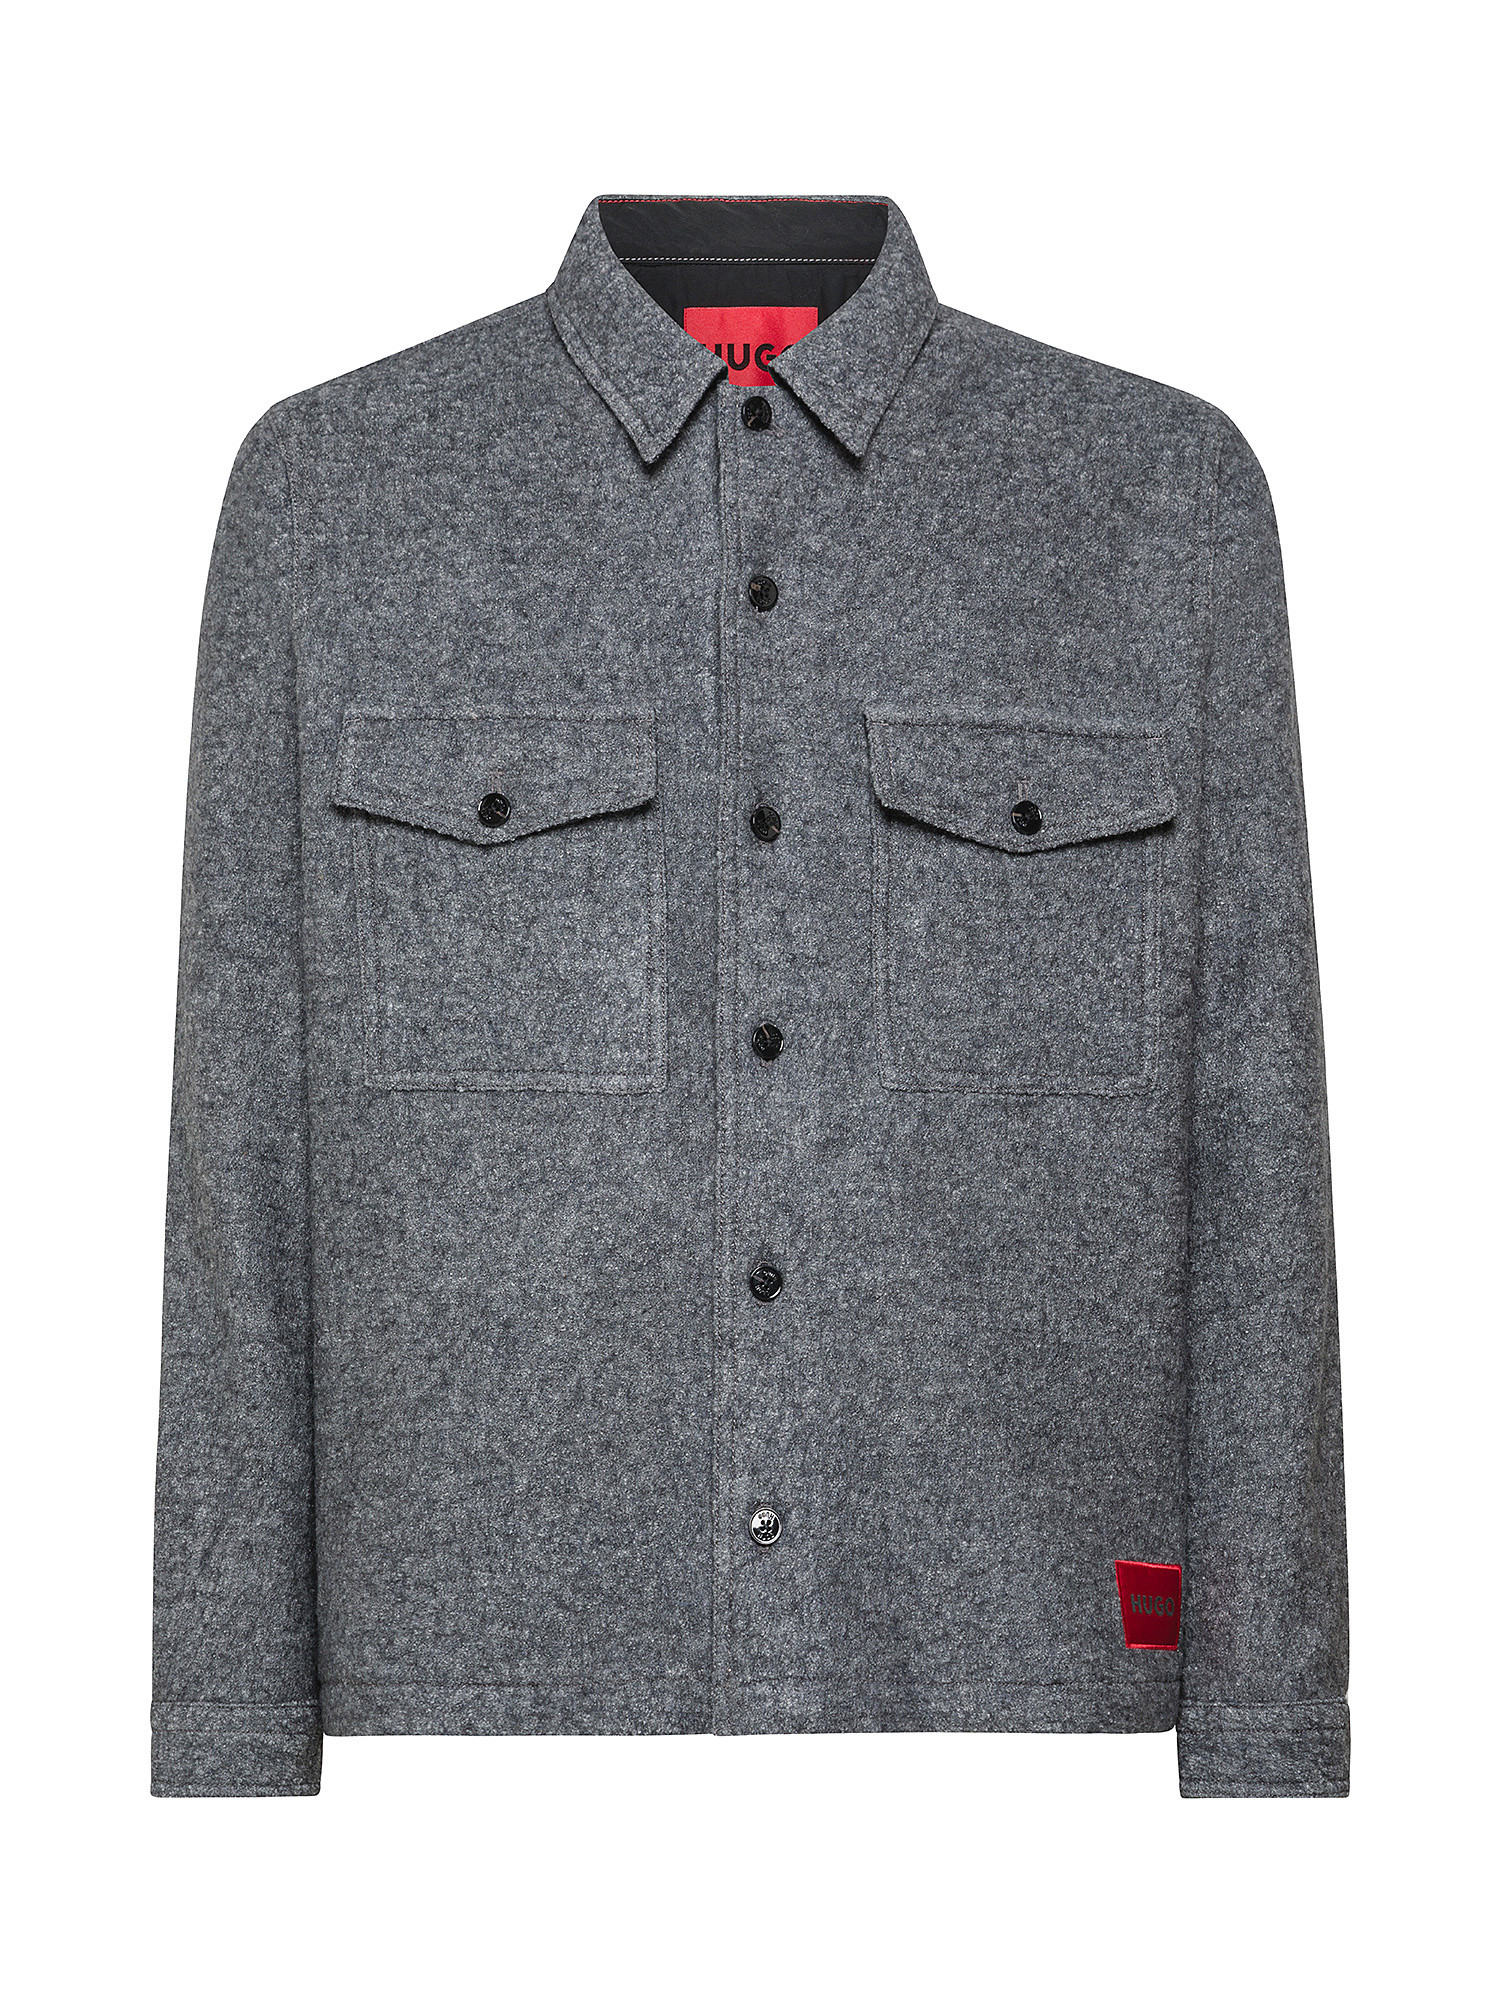 Hugo - Giacca a camicia oversize in misto lana, Grigio, large image number 0